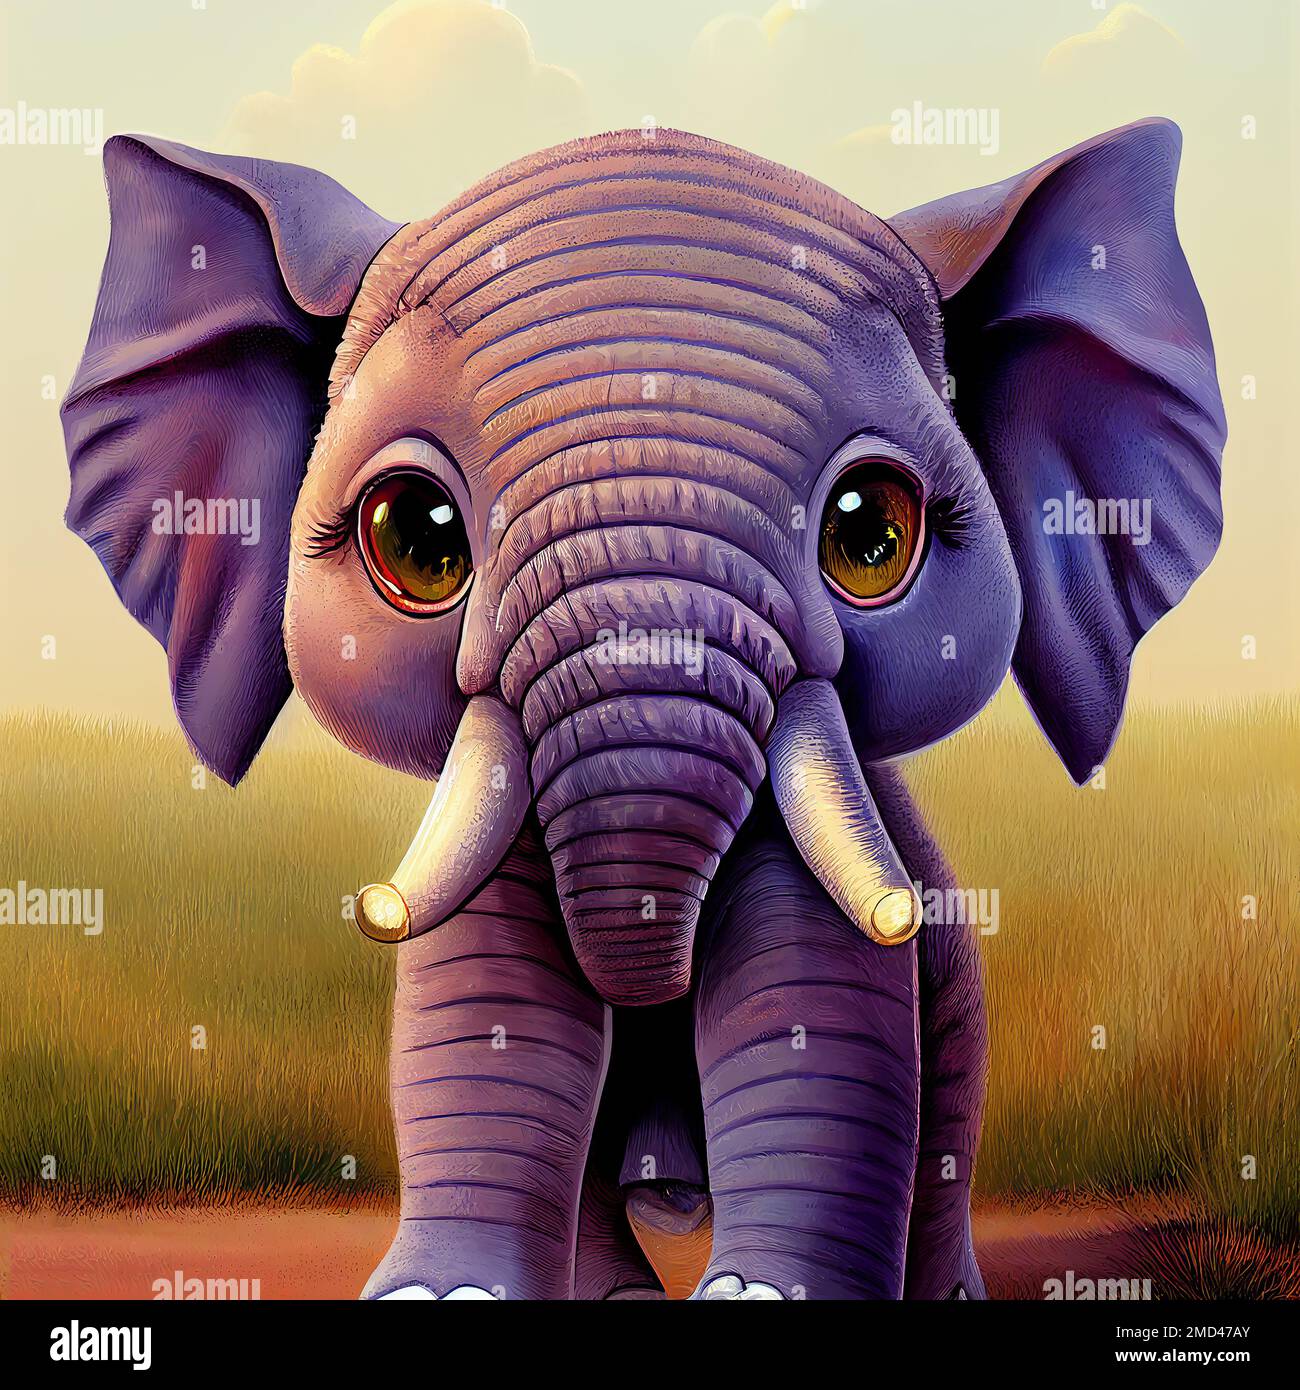 Cute and young elephant Stock Photo